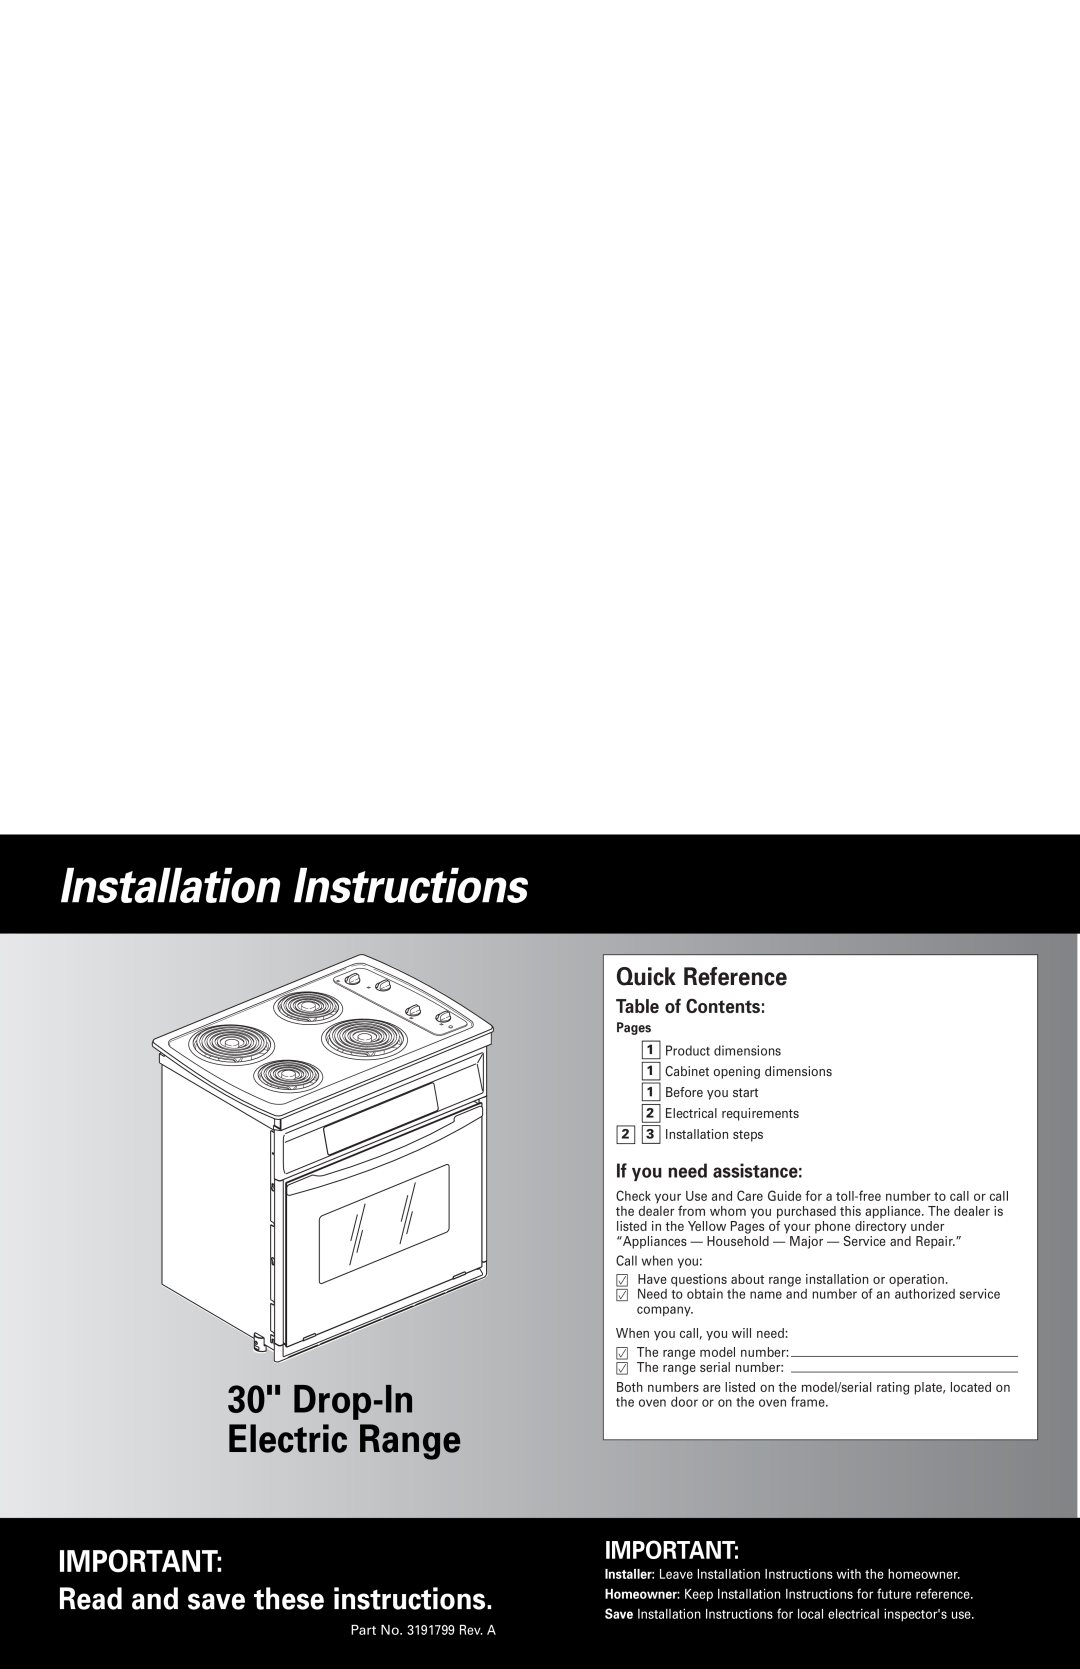 Whirlpool 3191799 installation instructions Installation Instructions, Drop-In Electric Range, Quick Reference 